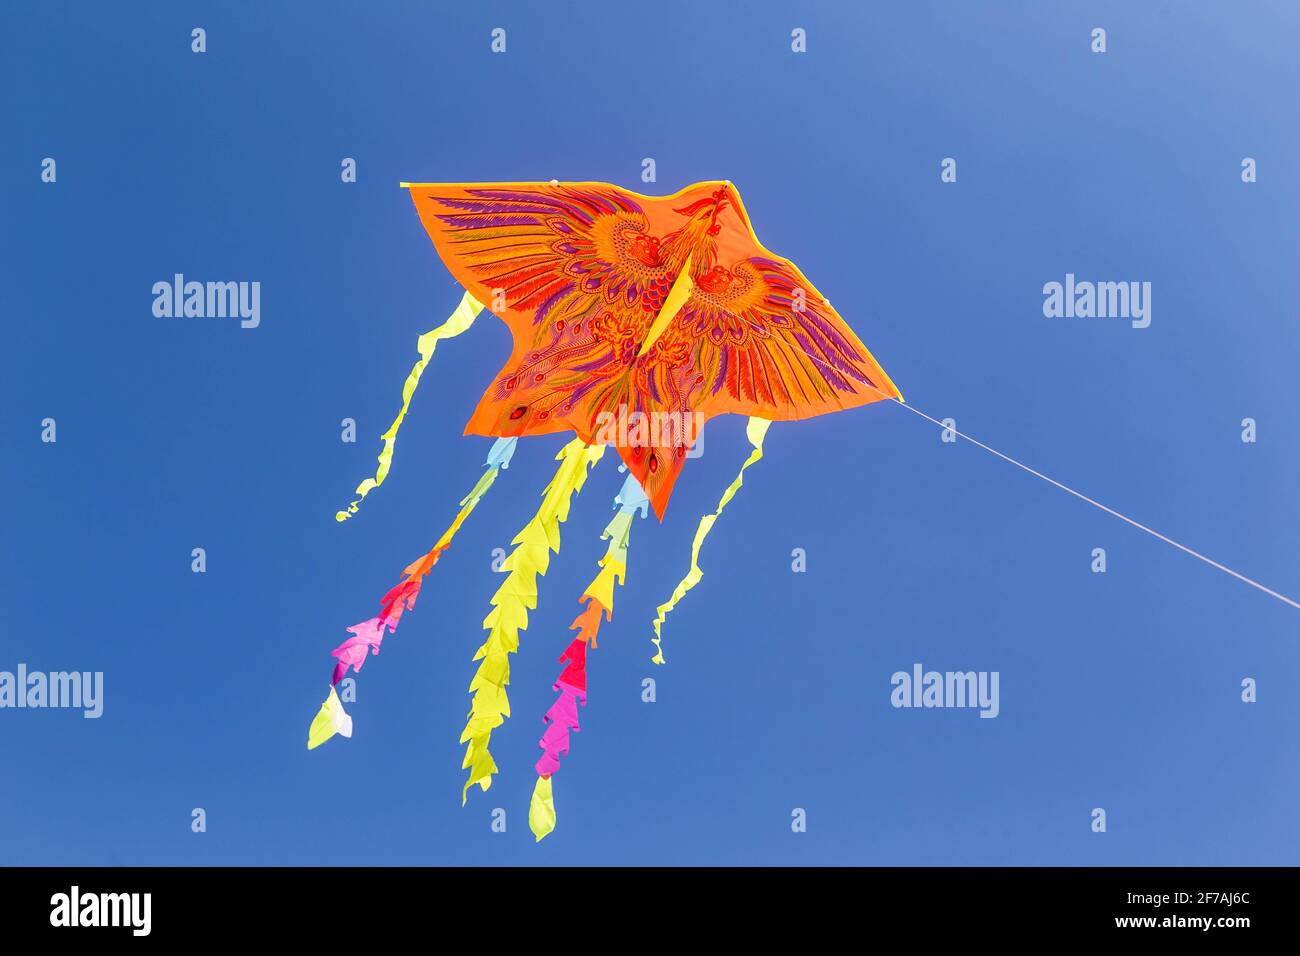 Colorful chinese kite flying in the blue sky. Stock Photo